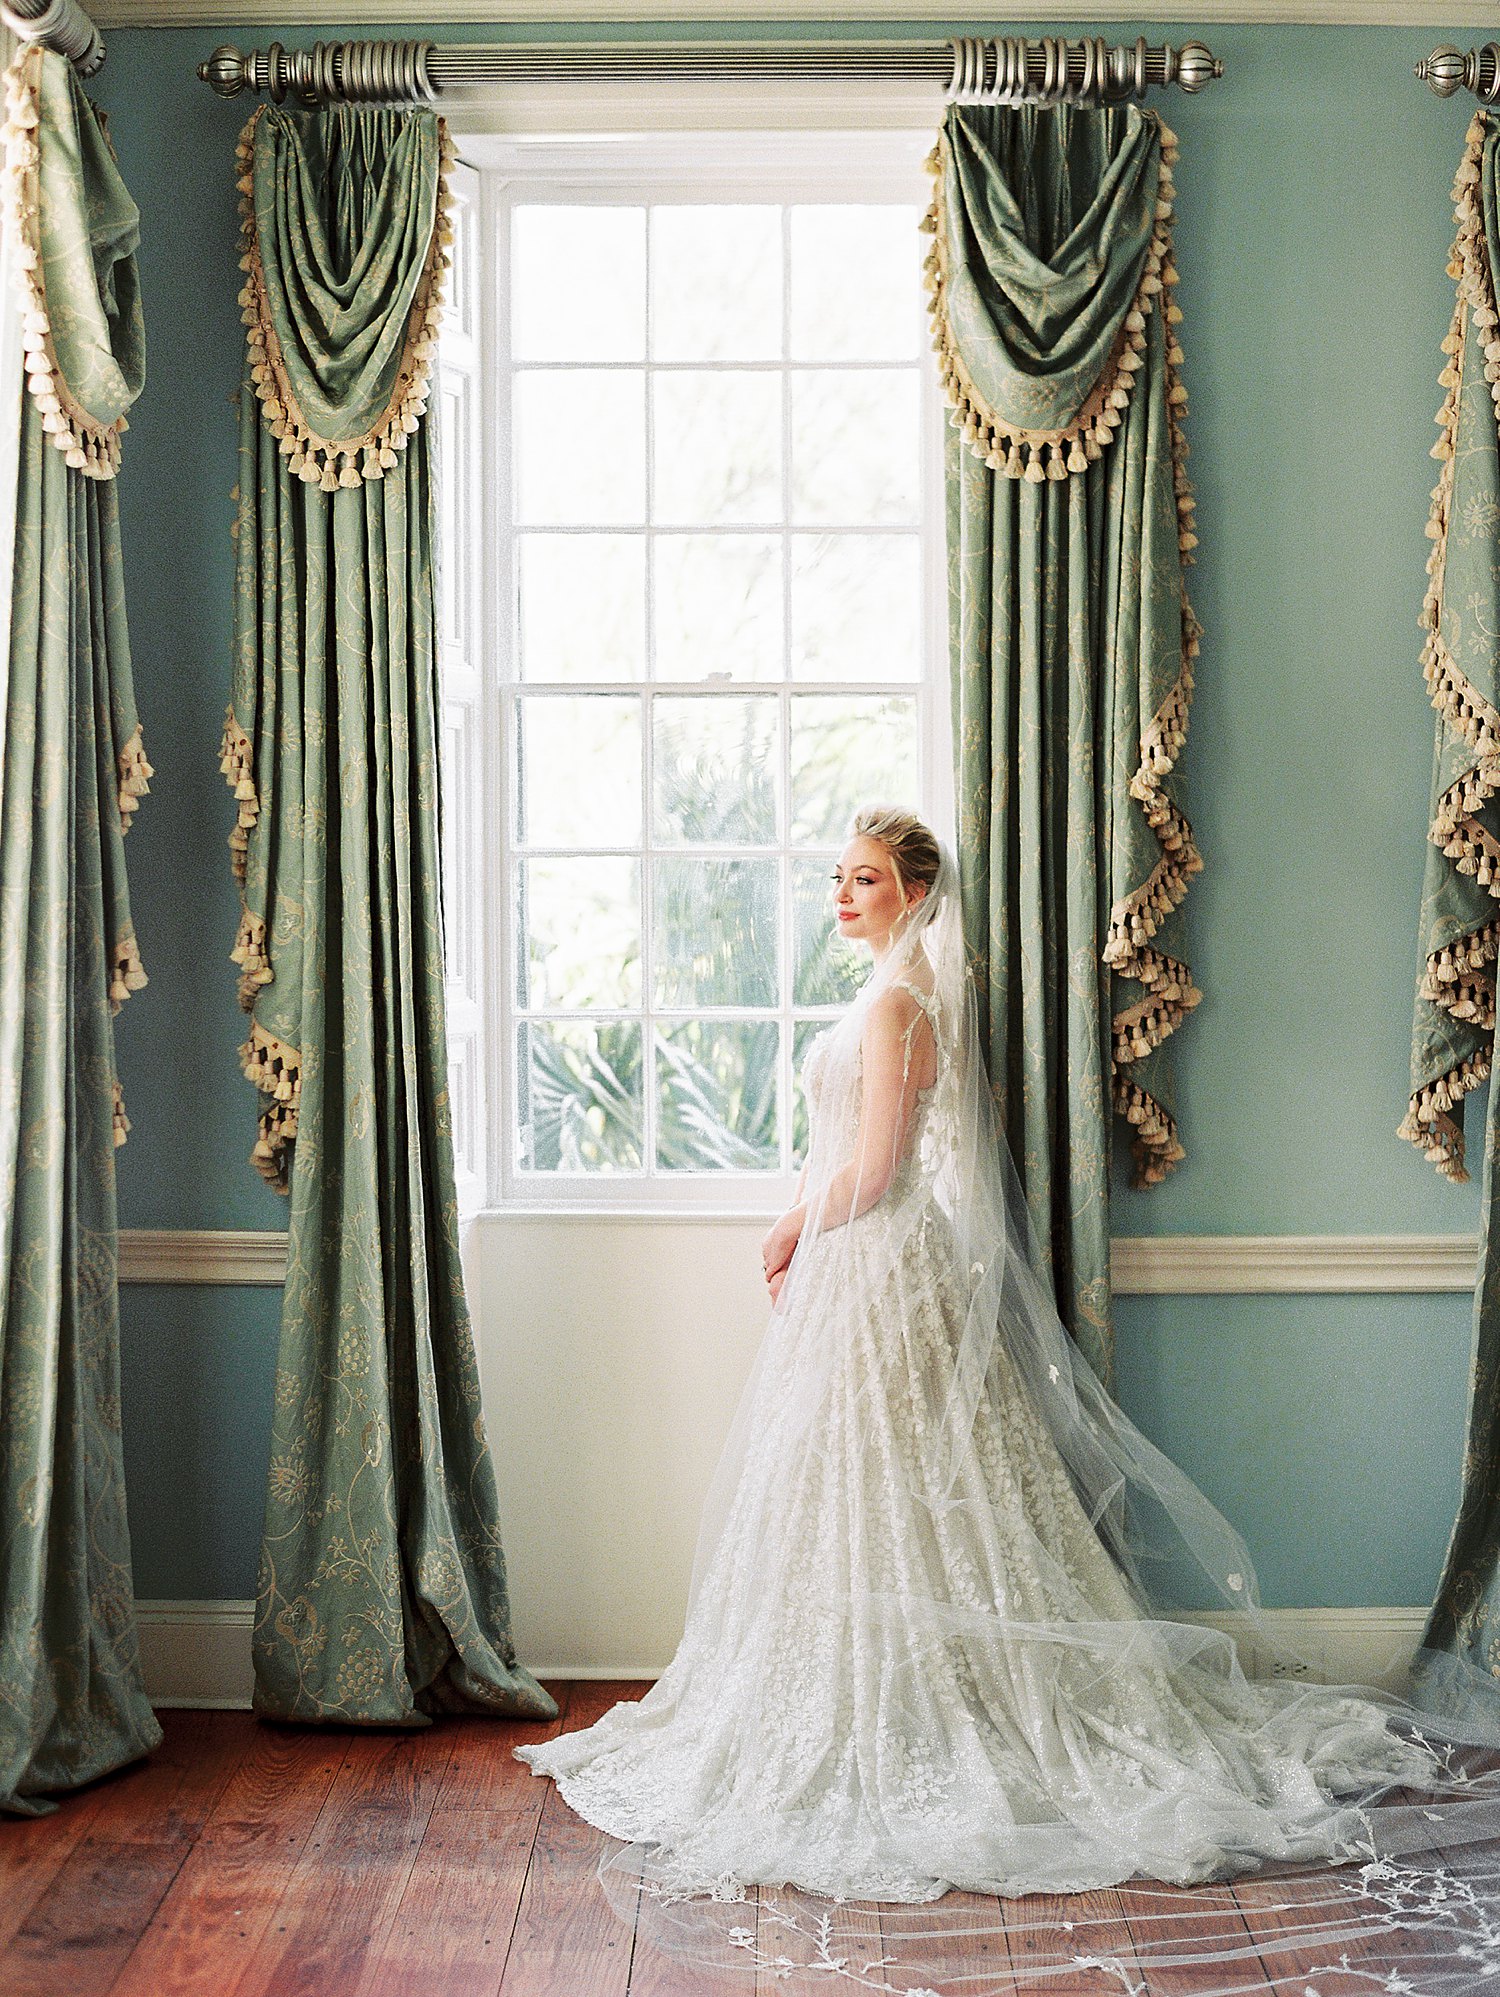 Bride in white wedding dress and veil standing at window with green curtains at Lowndes Grove Charleston